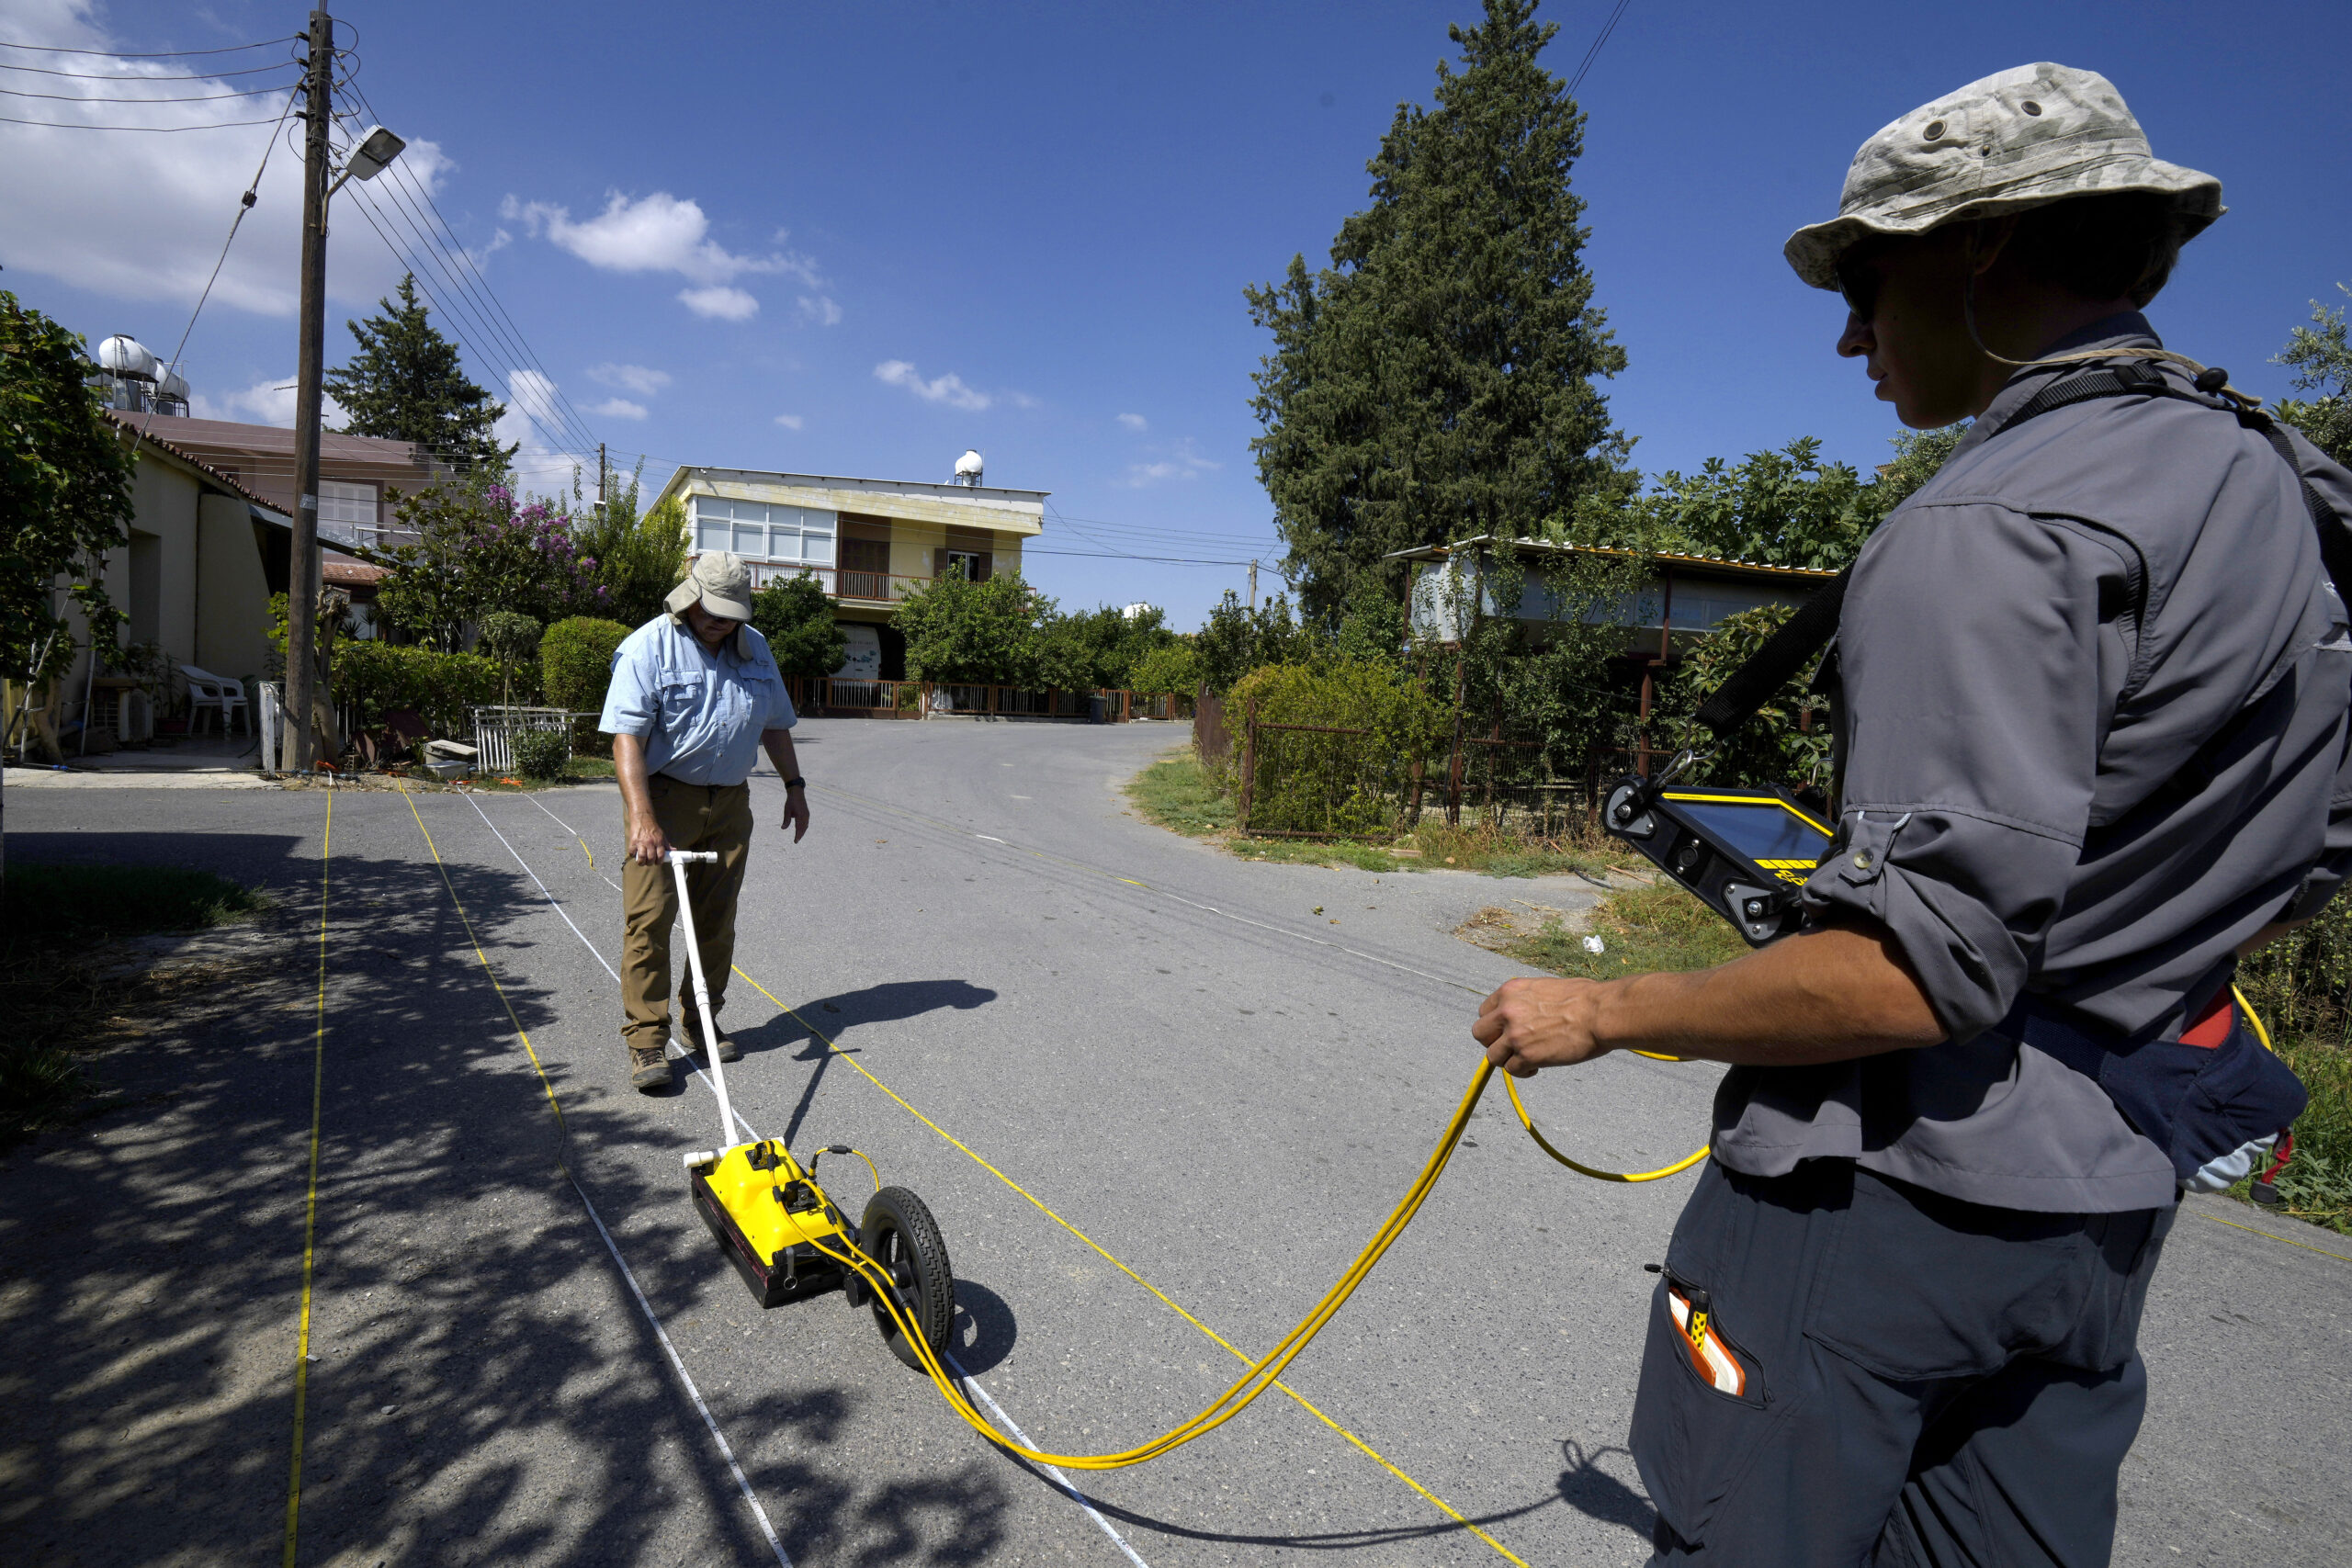 Harry M. Jol, left, a geography and anthropology professor at the University of Wisconsin Eau Claire, operate ground-penetrating radar in Cyprus.